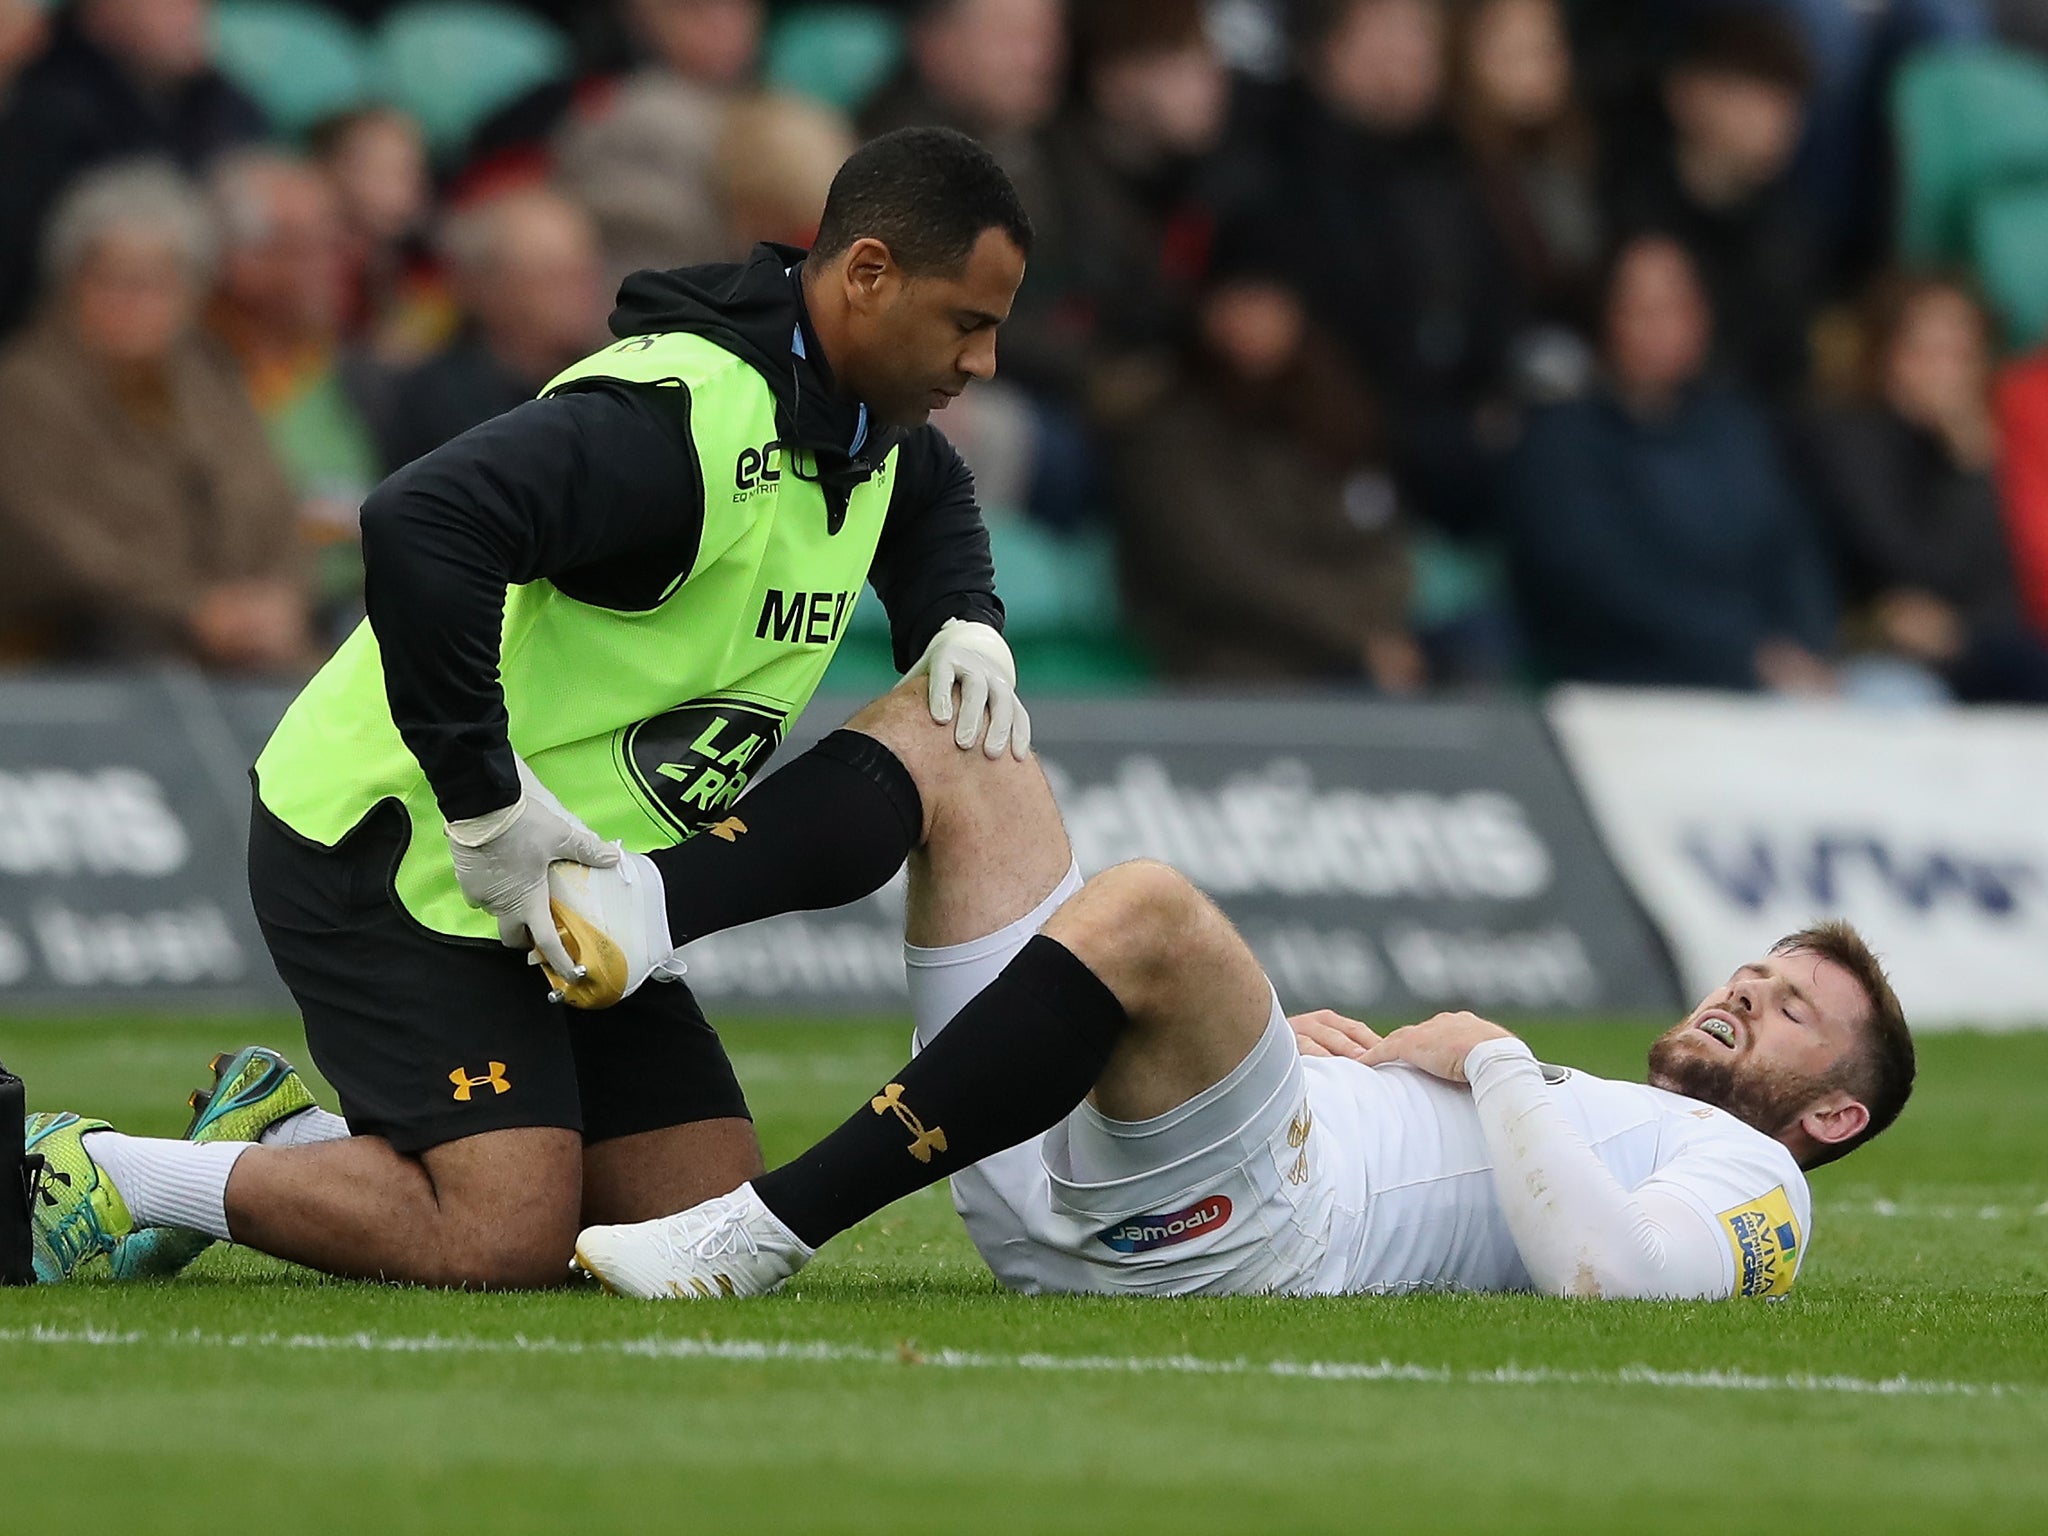 Elliot Daly suffered a knee injury and did not return for the second half